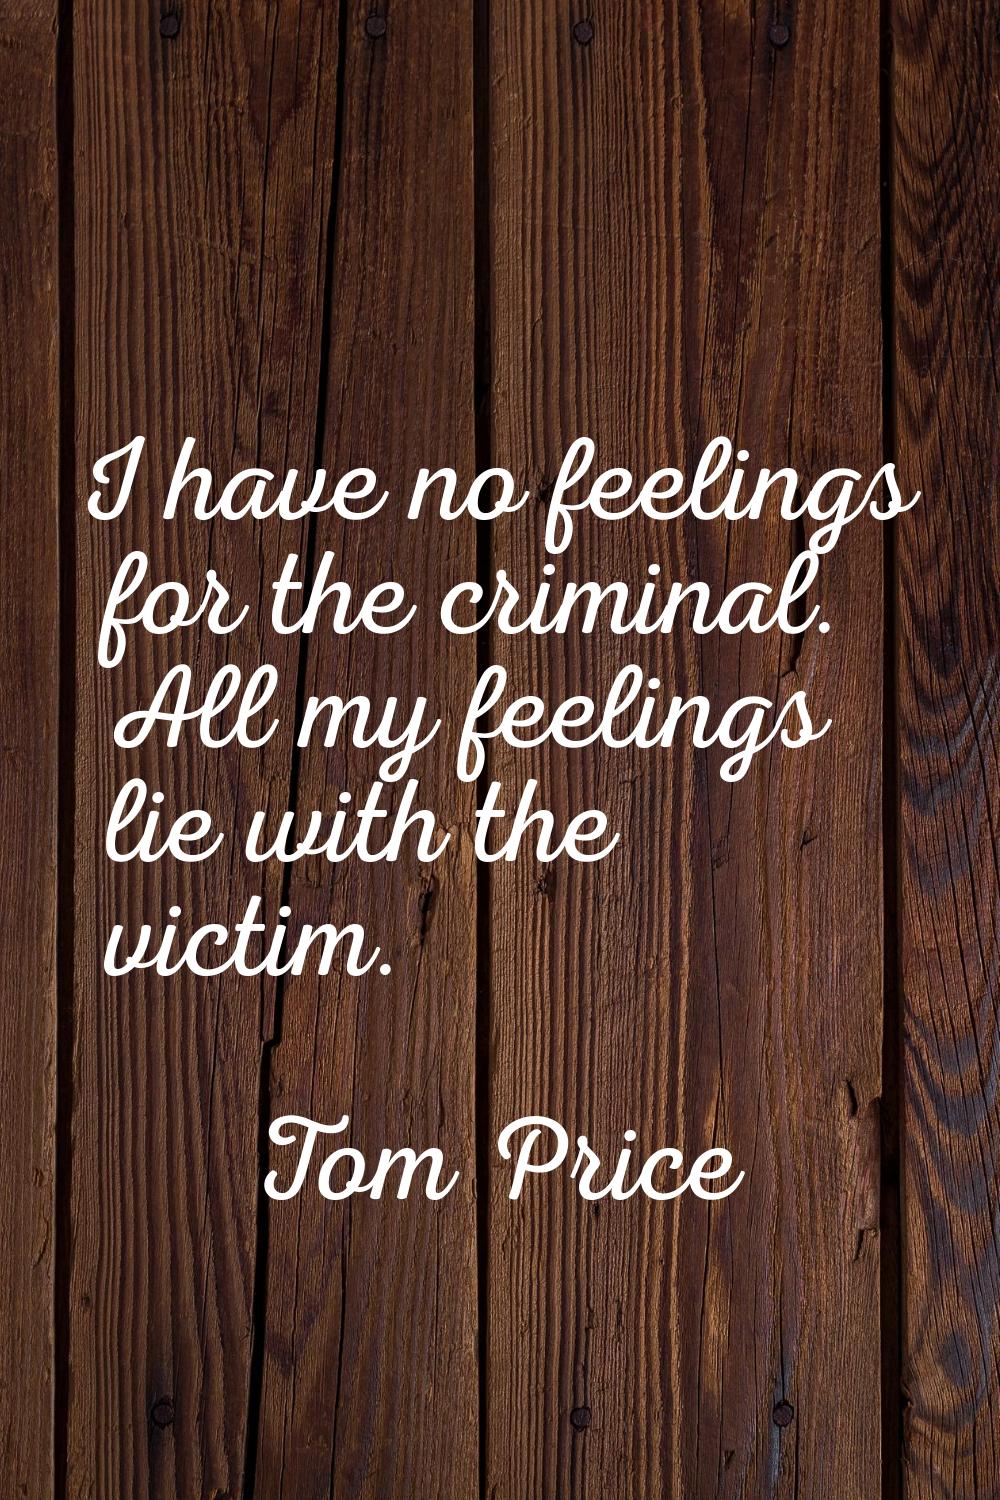 I have no feelings for the criminal. All my feelings lie with the victim.